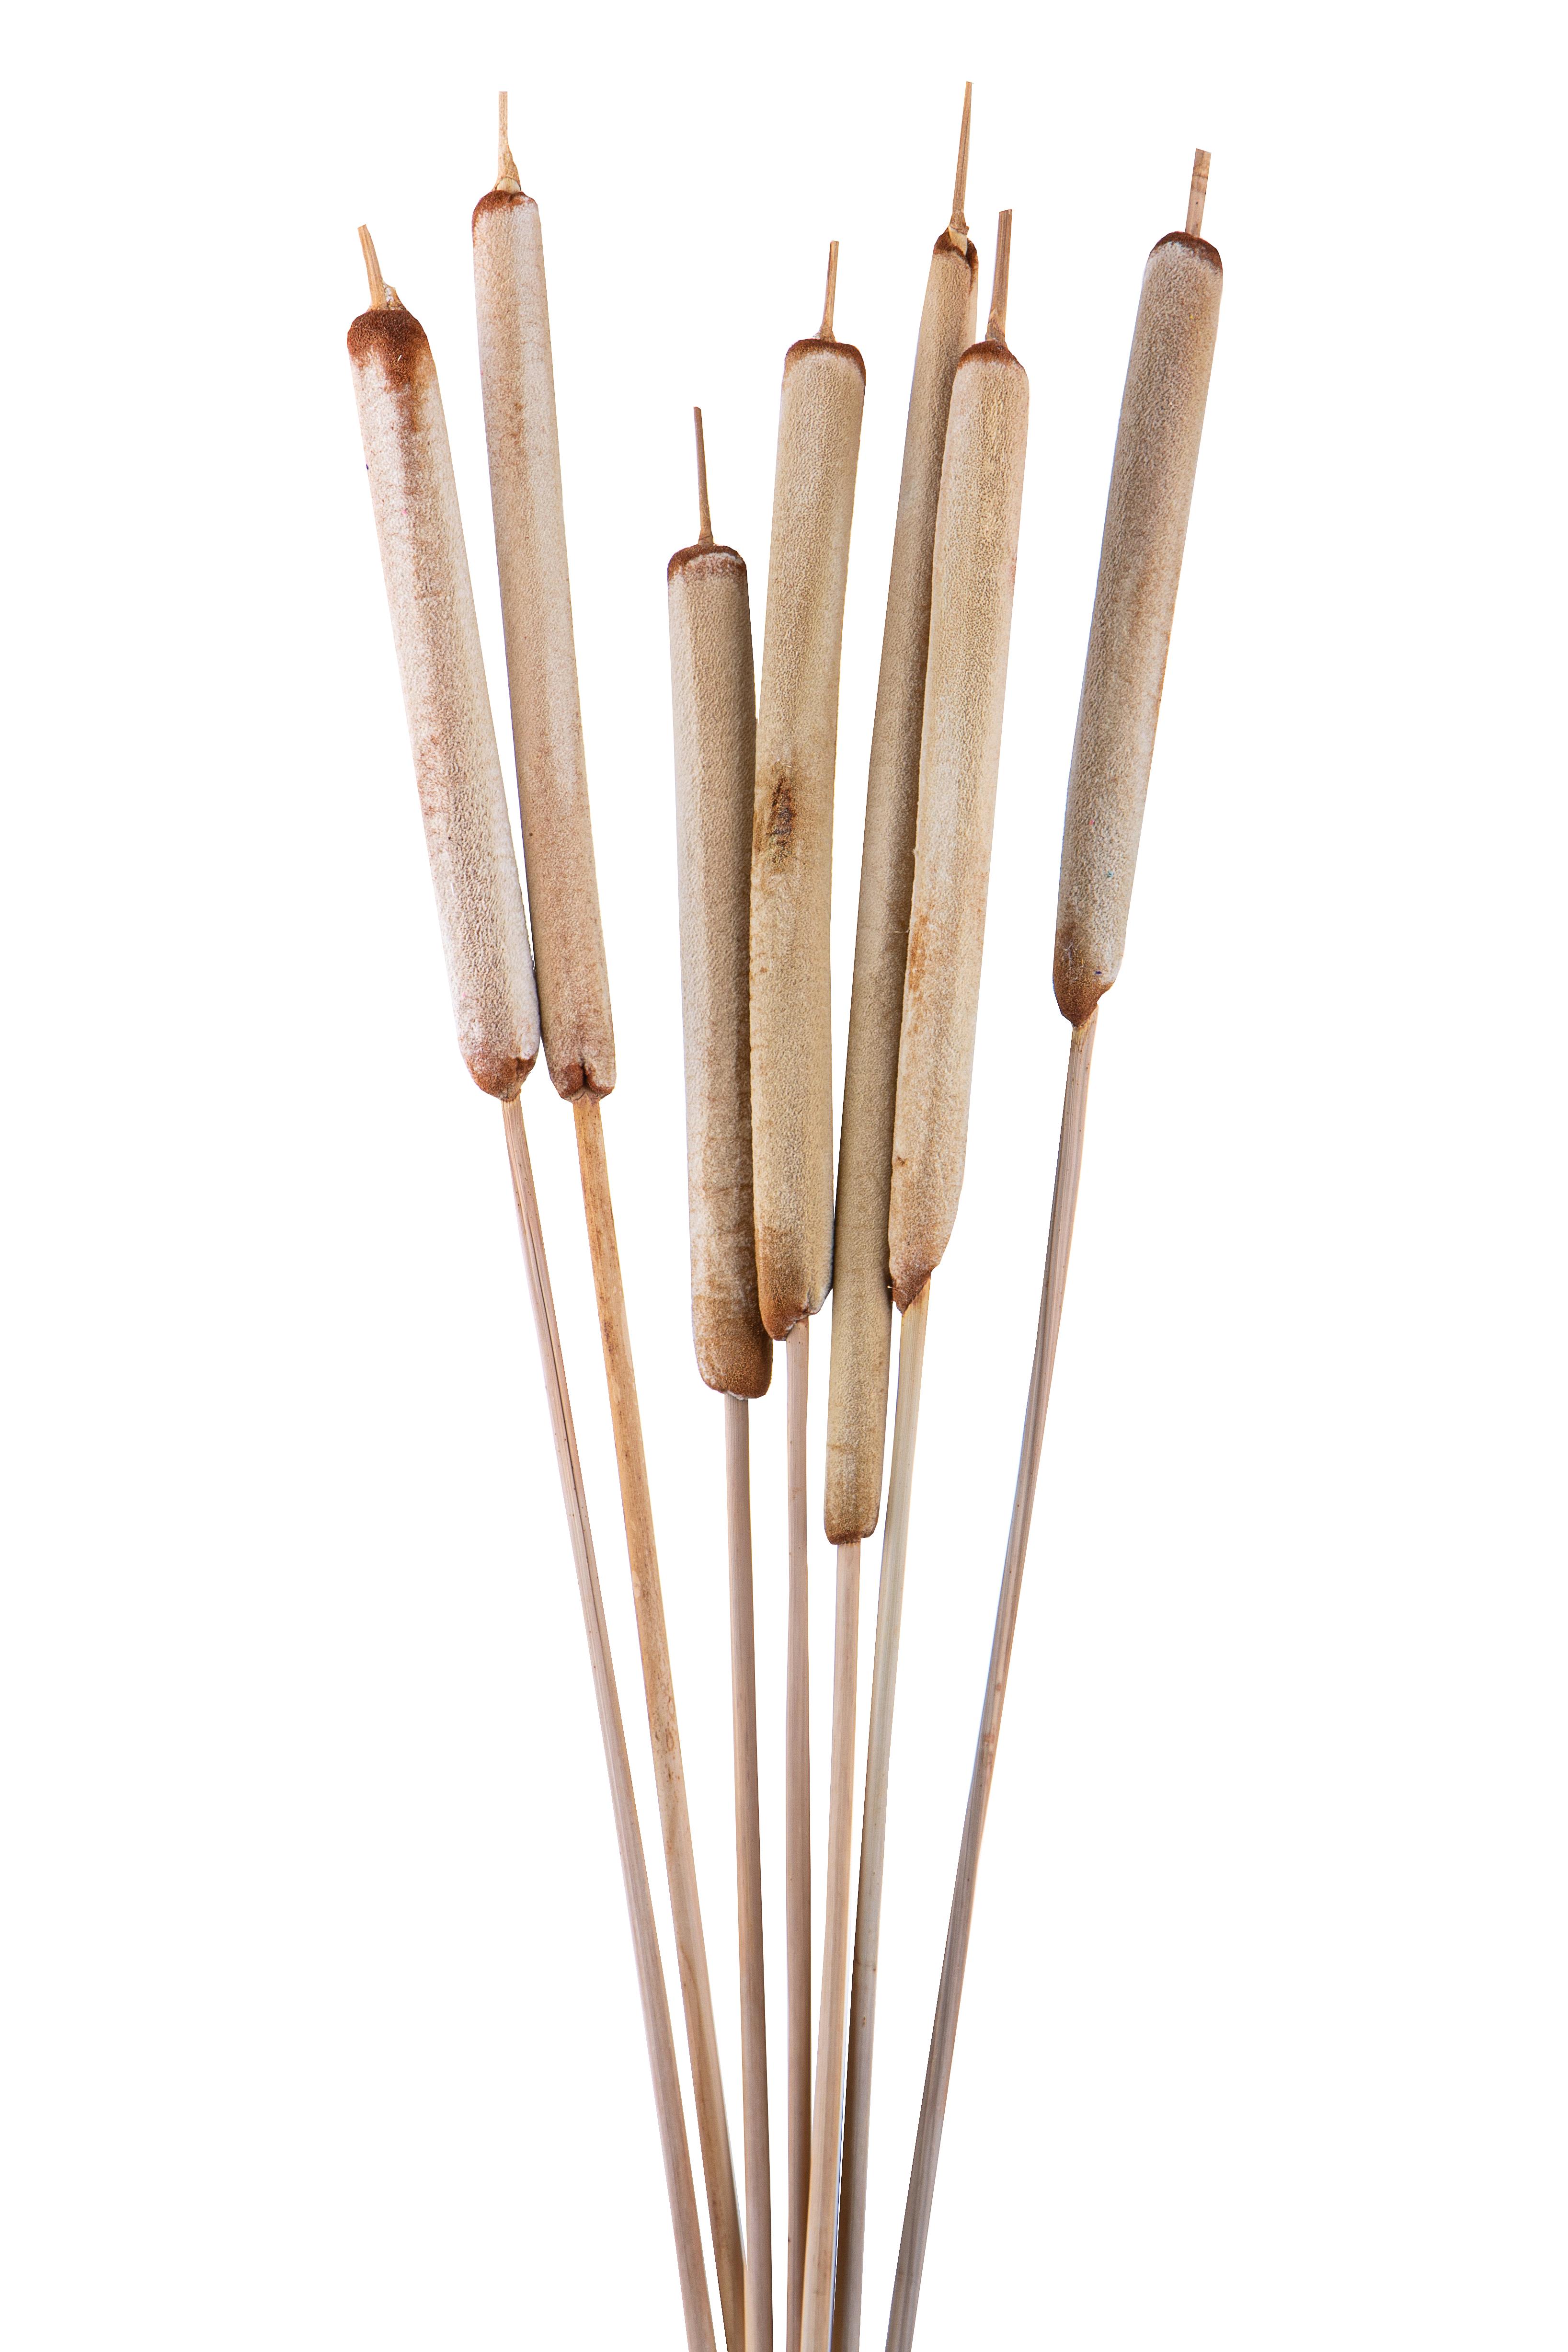 HEARTS, S.VALENTINE, MOM'S DAY,HEARTS IN RATTAN AND OTHER MATERIALS,TYPHA PELATO 7 PZ CREMA